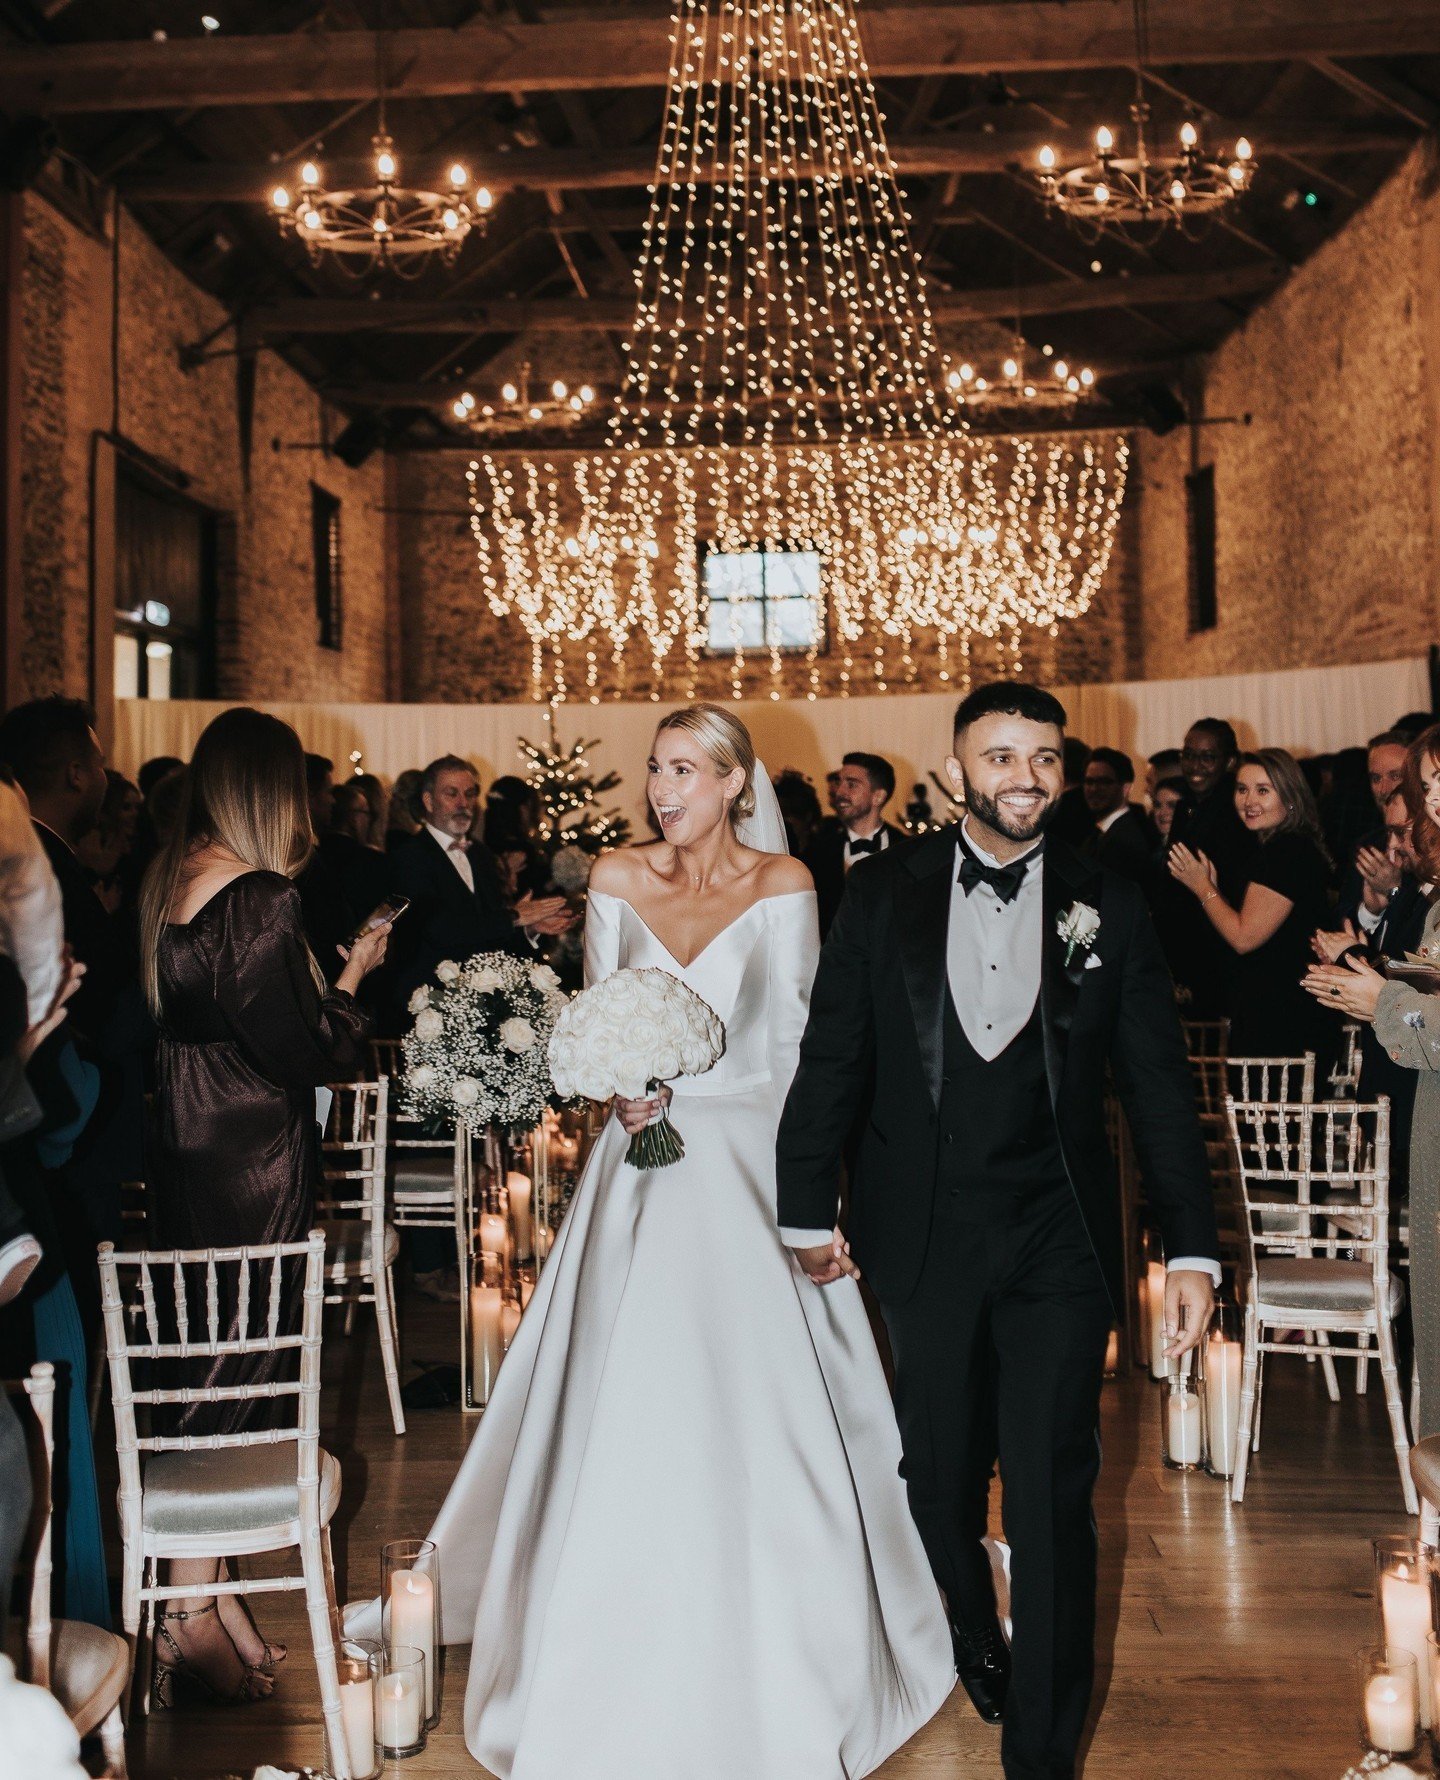 R &amp; T celebrating their happily ever after in the our Granary Barn. From elegant candlelit aisles to mulled wine &amp; dancing this wedding is a fairy tale come true. ⁠
⁠
At The Granary Estates our team of Event Coordinators helped bring the coup